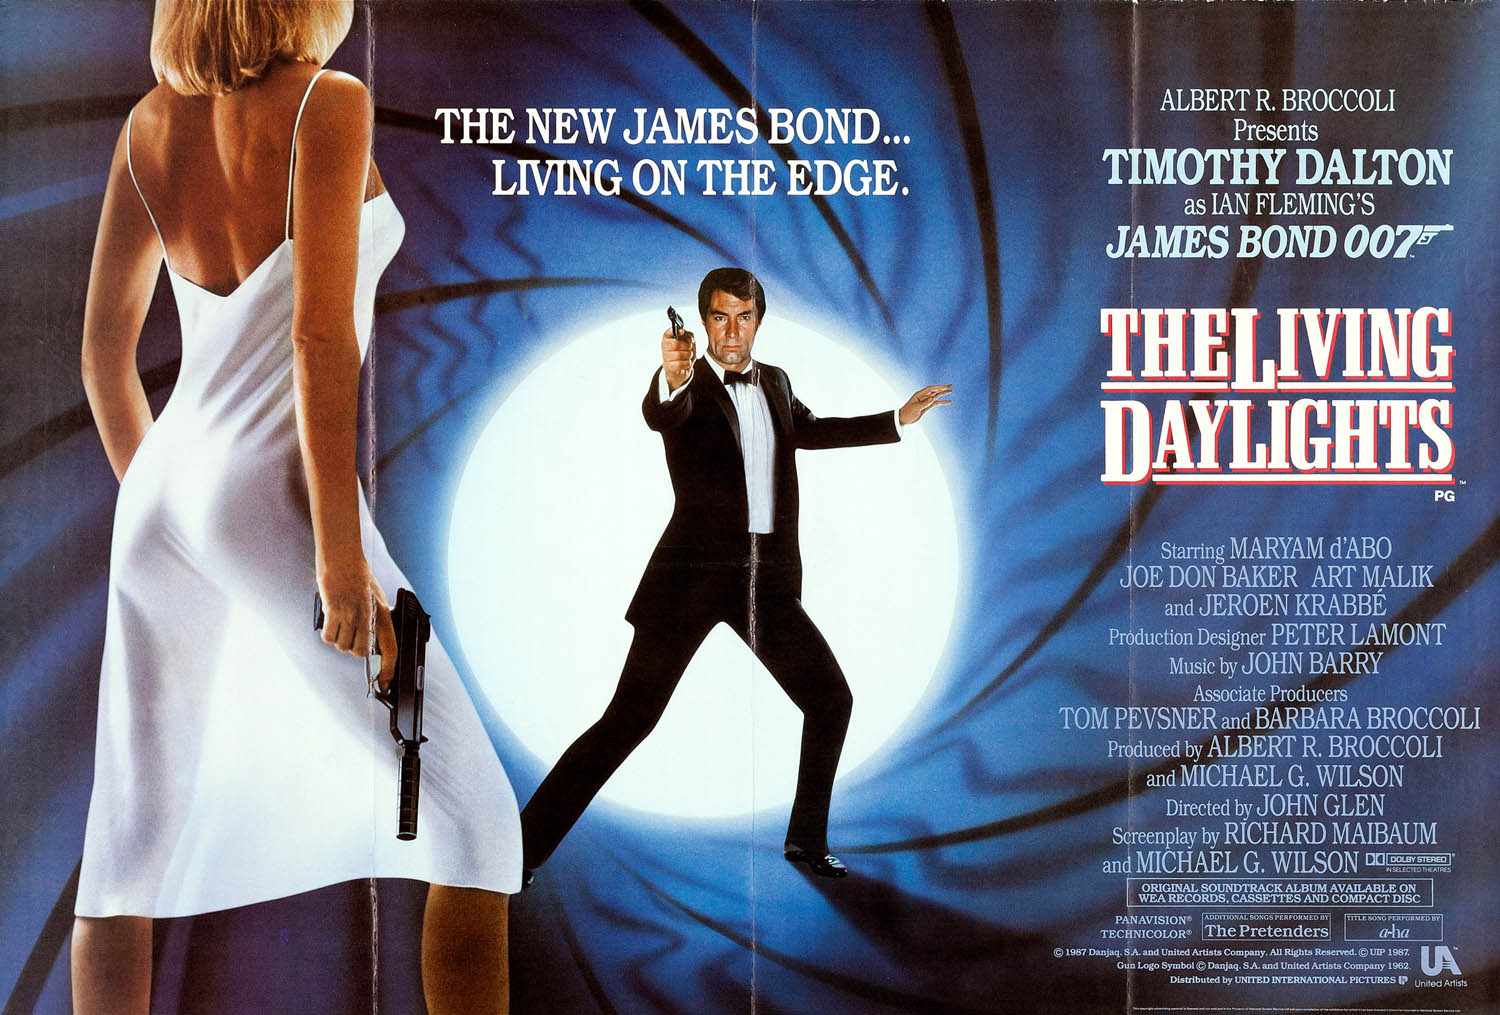 45-facts-about-the-movie-the-living-daylights